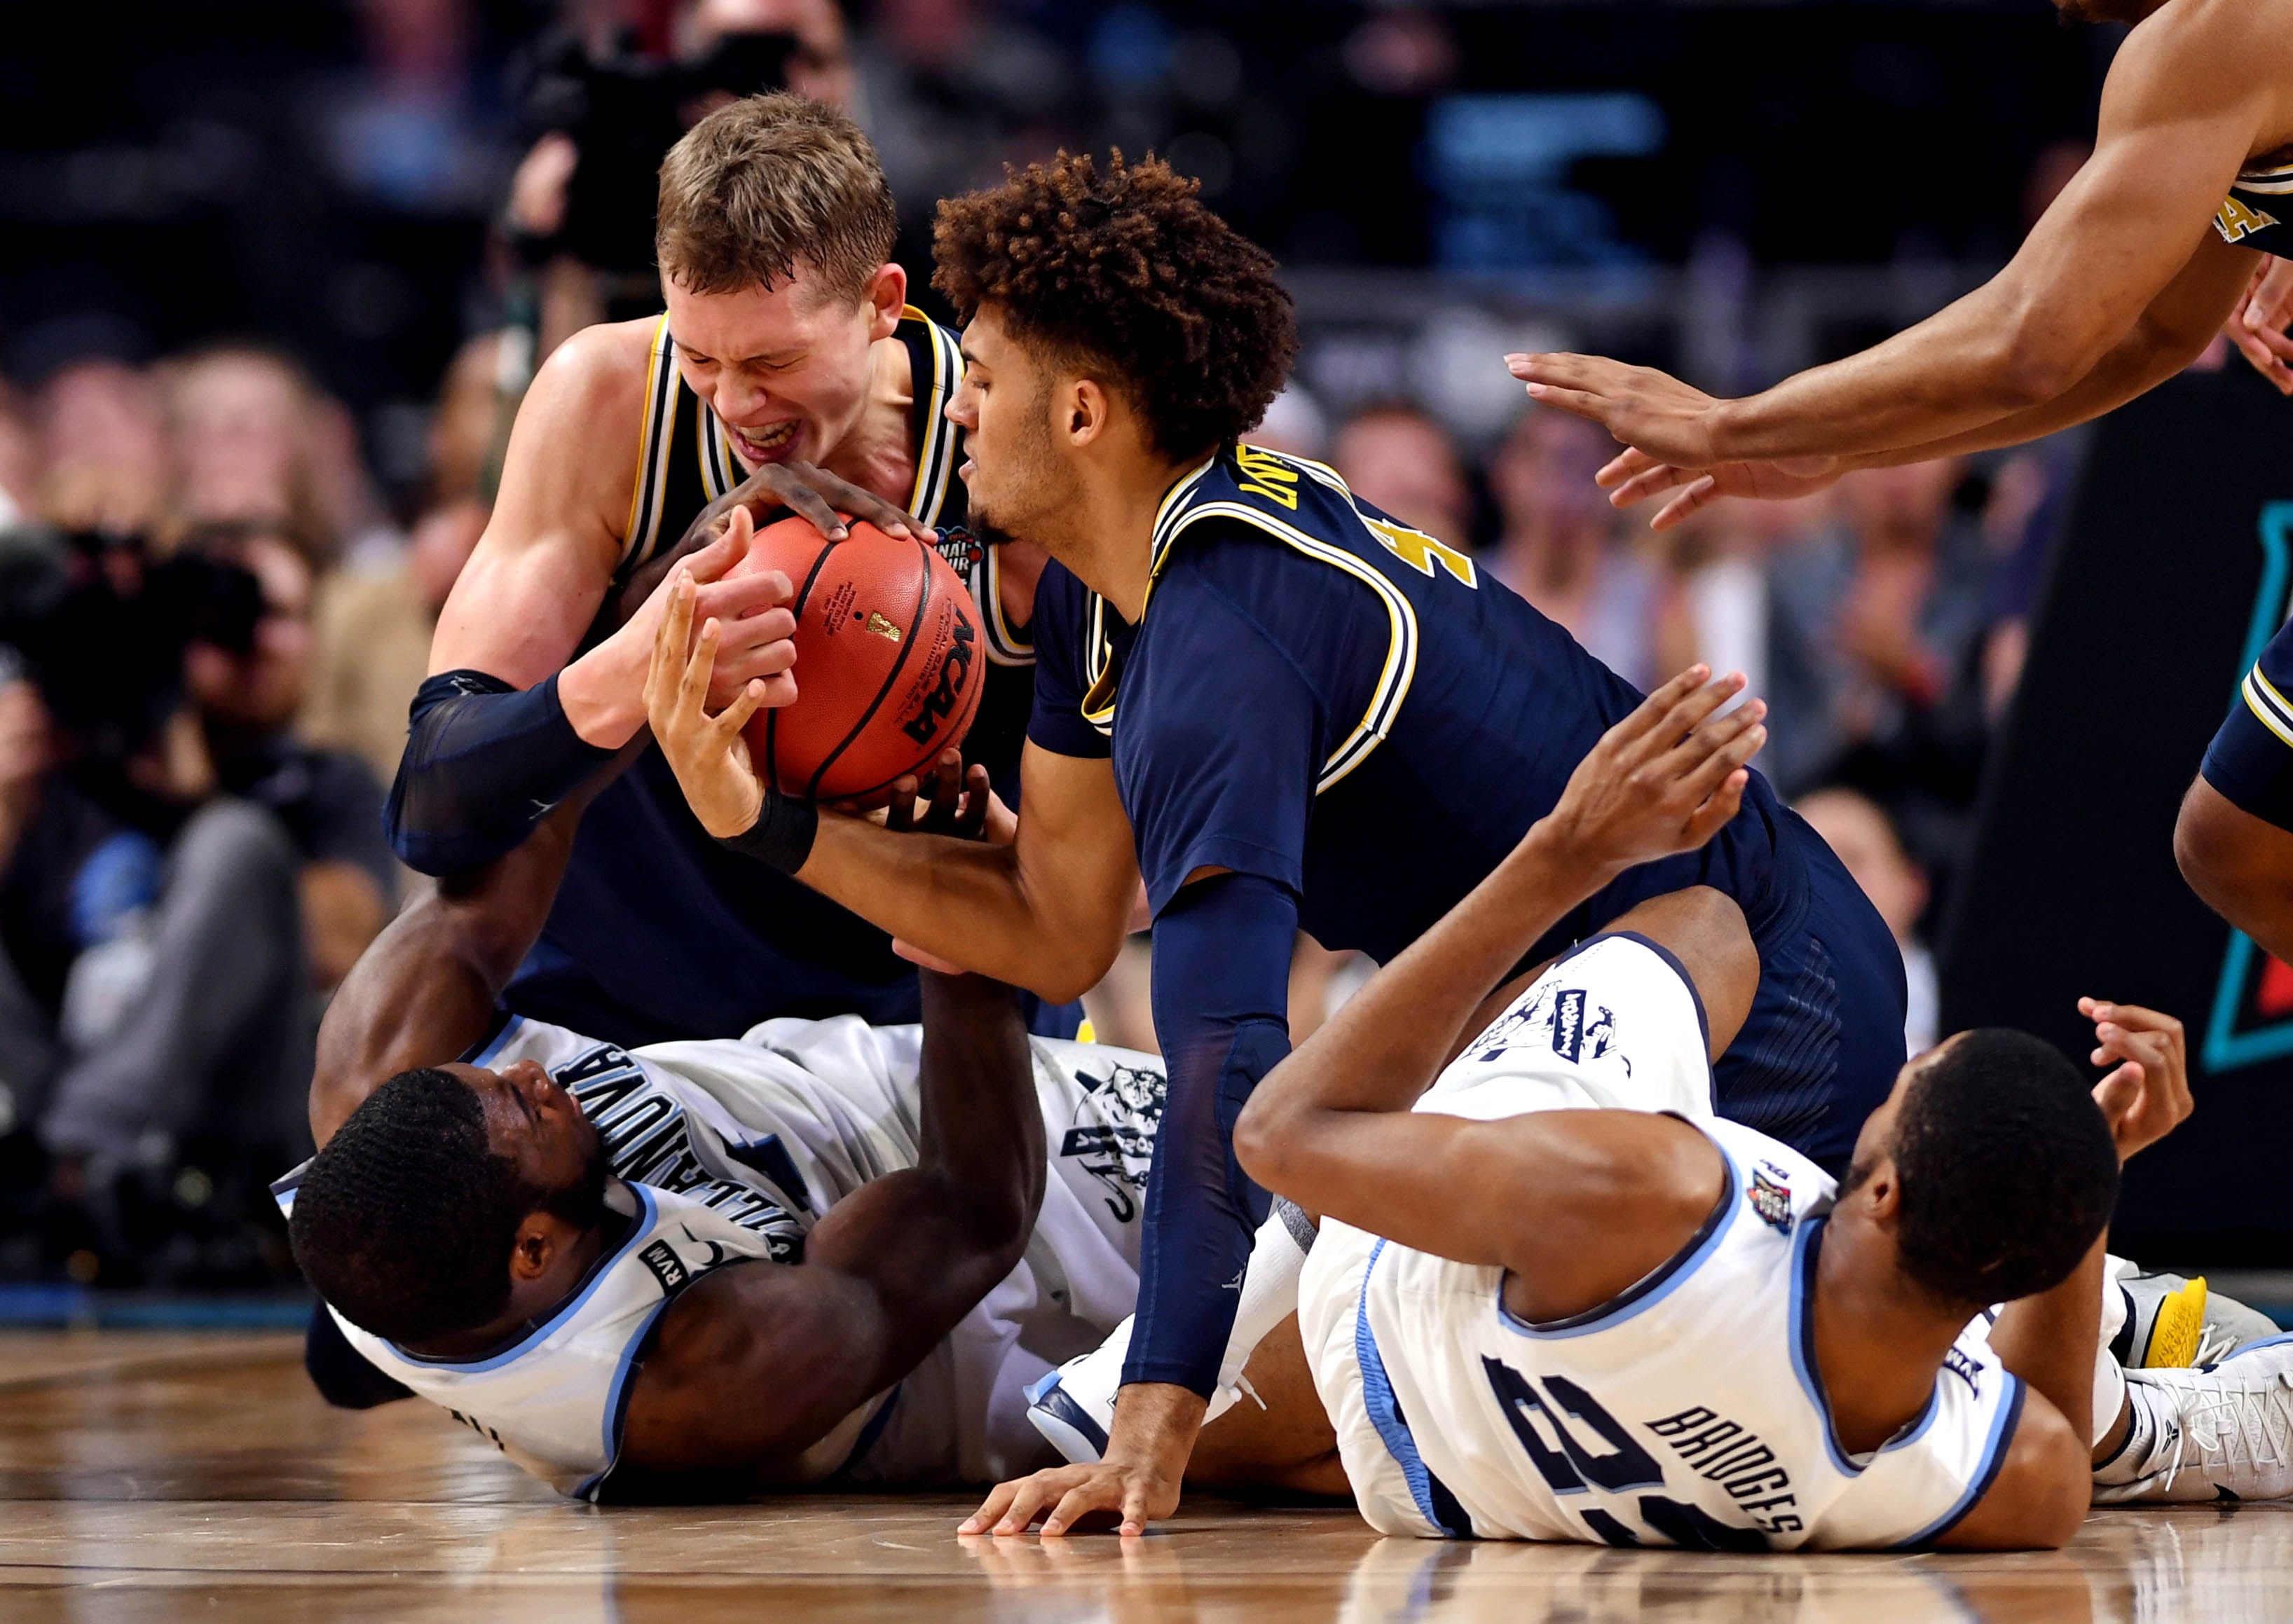 Michigan Wolverines forward Moritz Wagner  and Villanova Wildcats forward Eric Paschall go for the ball during the first half in the championship game of the 2018 men's Final Four at Alamodome in San Antonio.